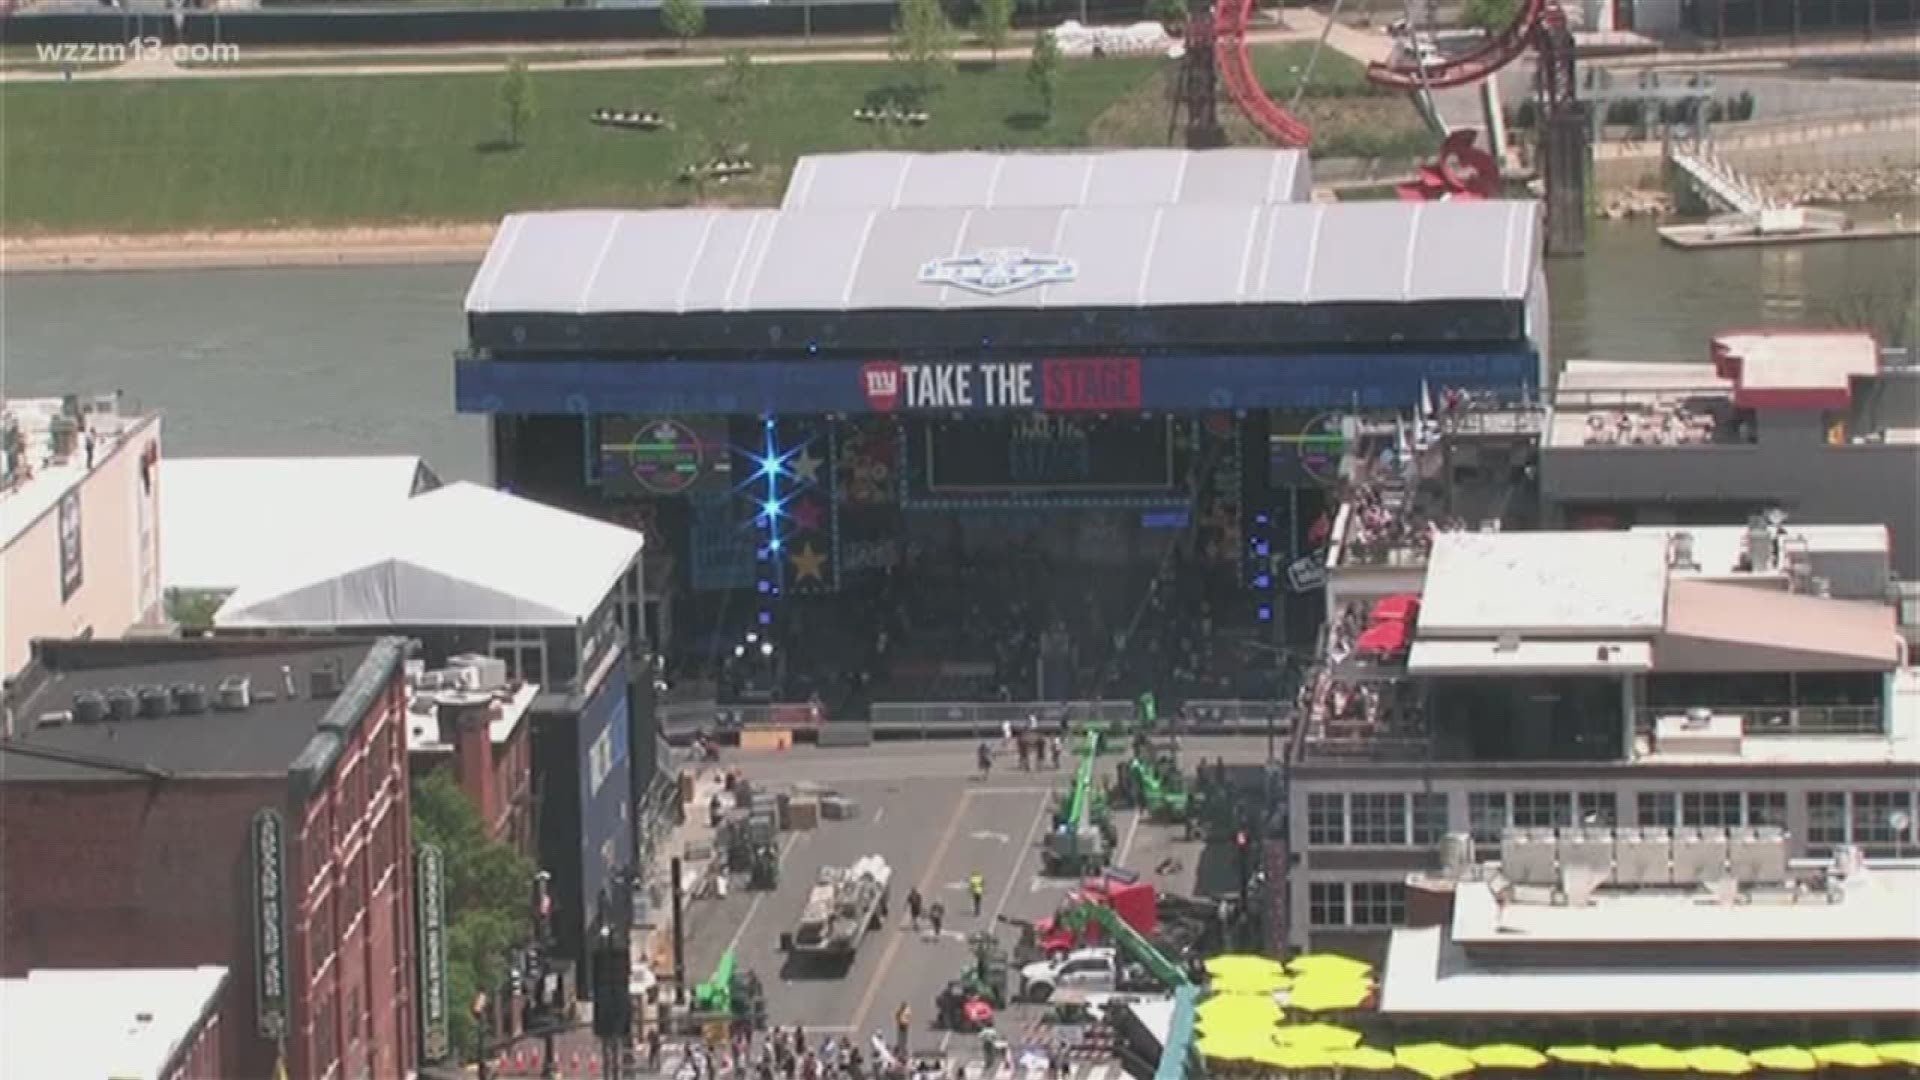 The 2019 NFL Draft begins today and will be held in Nashville, Tenn.